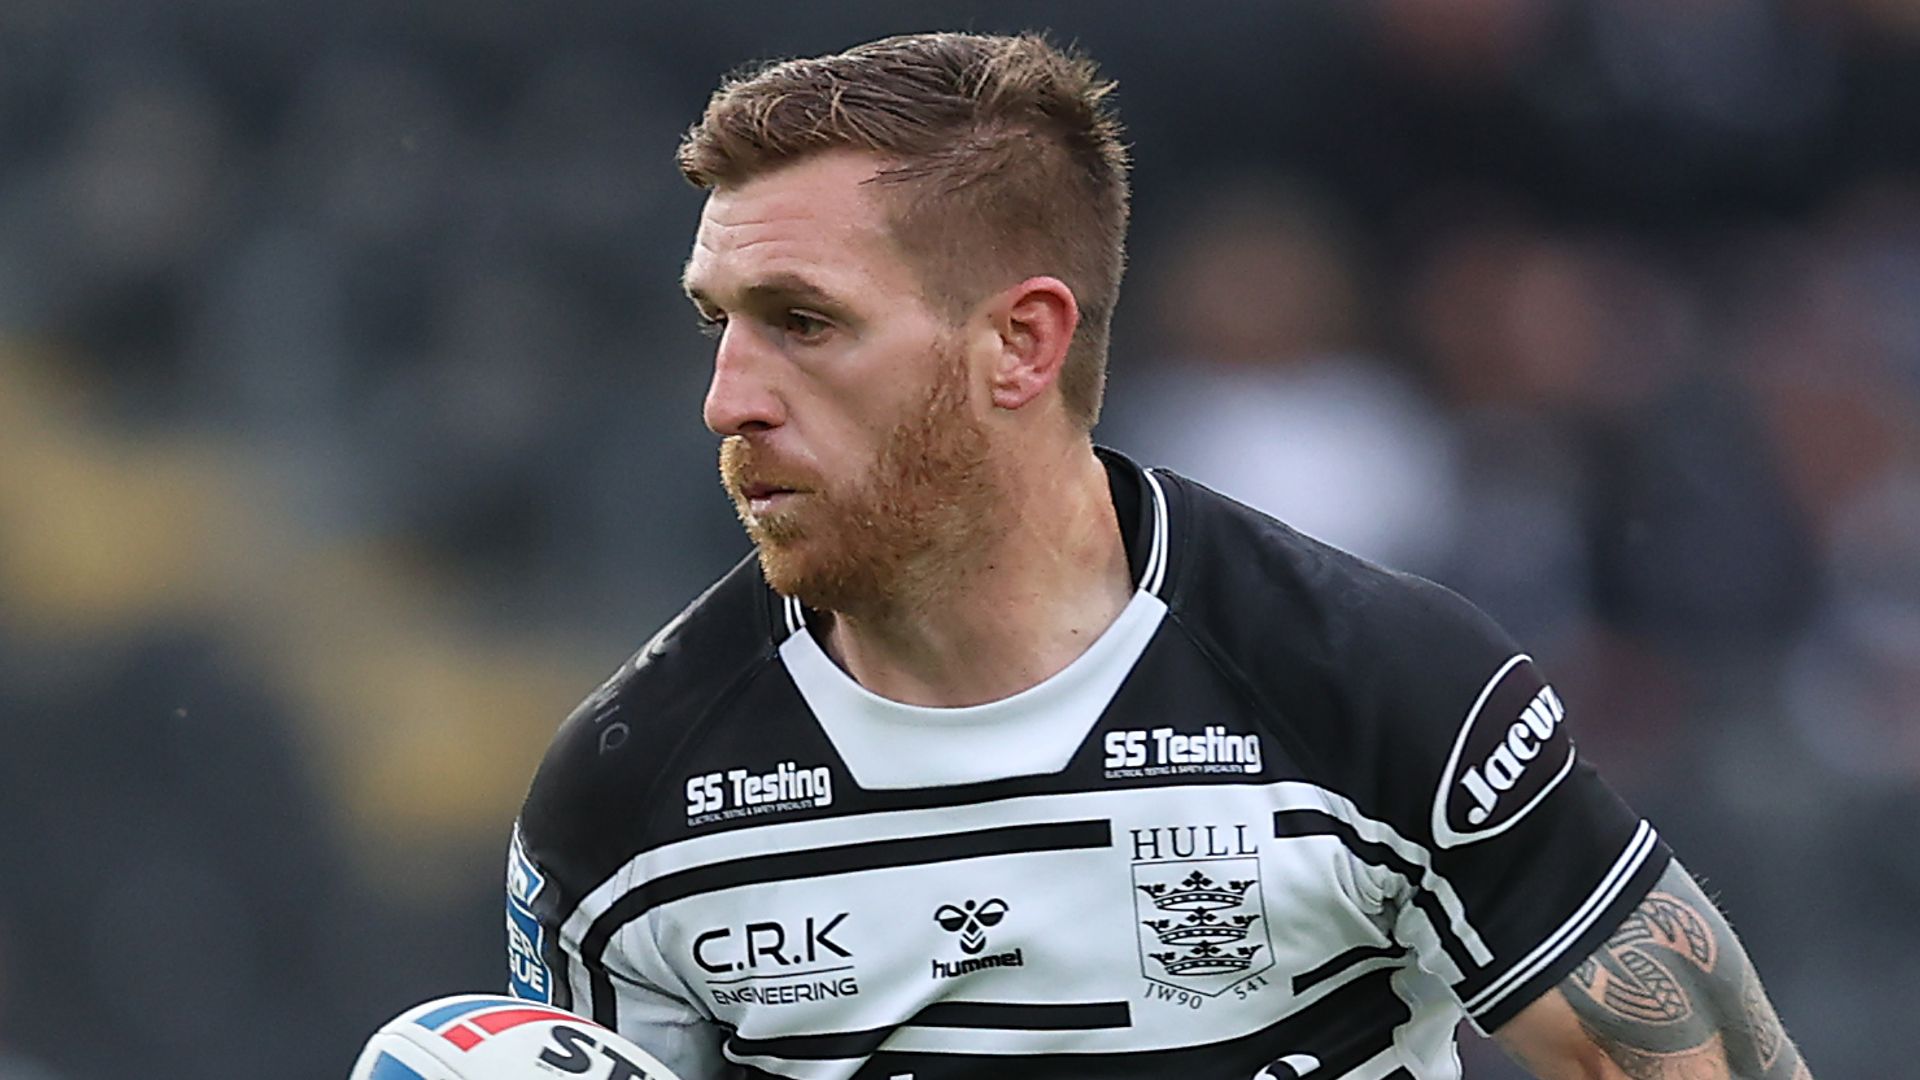 Ever-present Sneyd set for another milestone